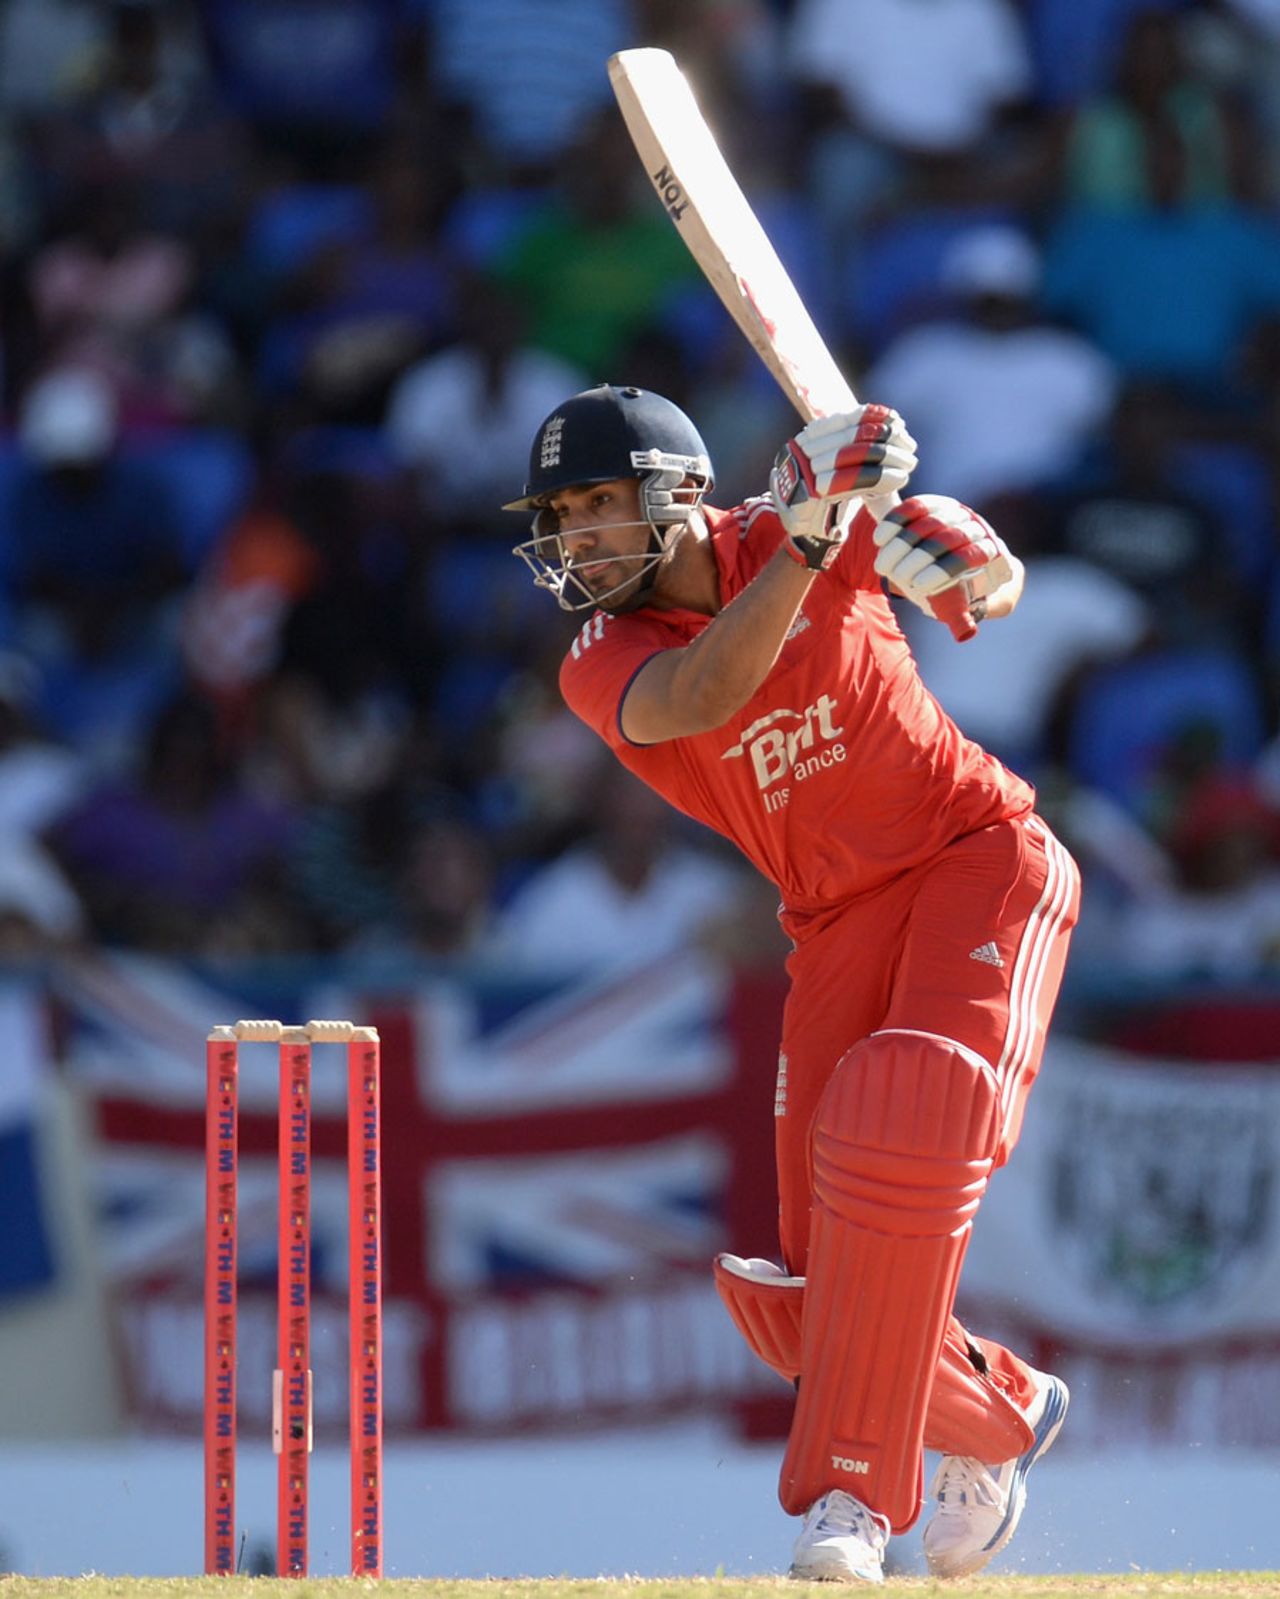 Ravi Bopara was very composed in getting England back on track, West Indies v England, 2nd ODI, North Sound, March 2, 2014